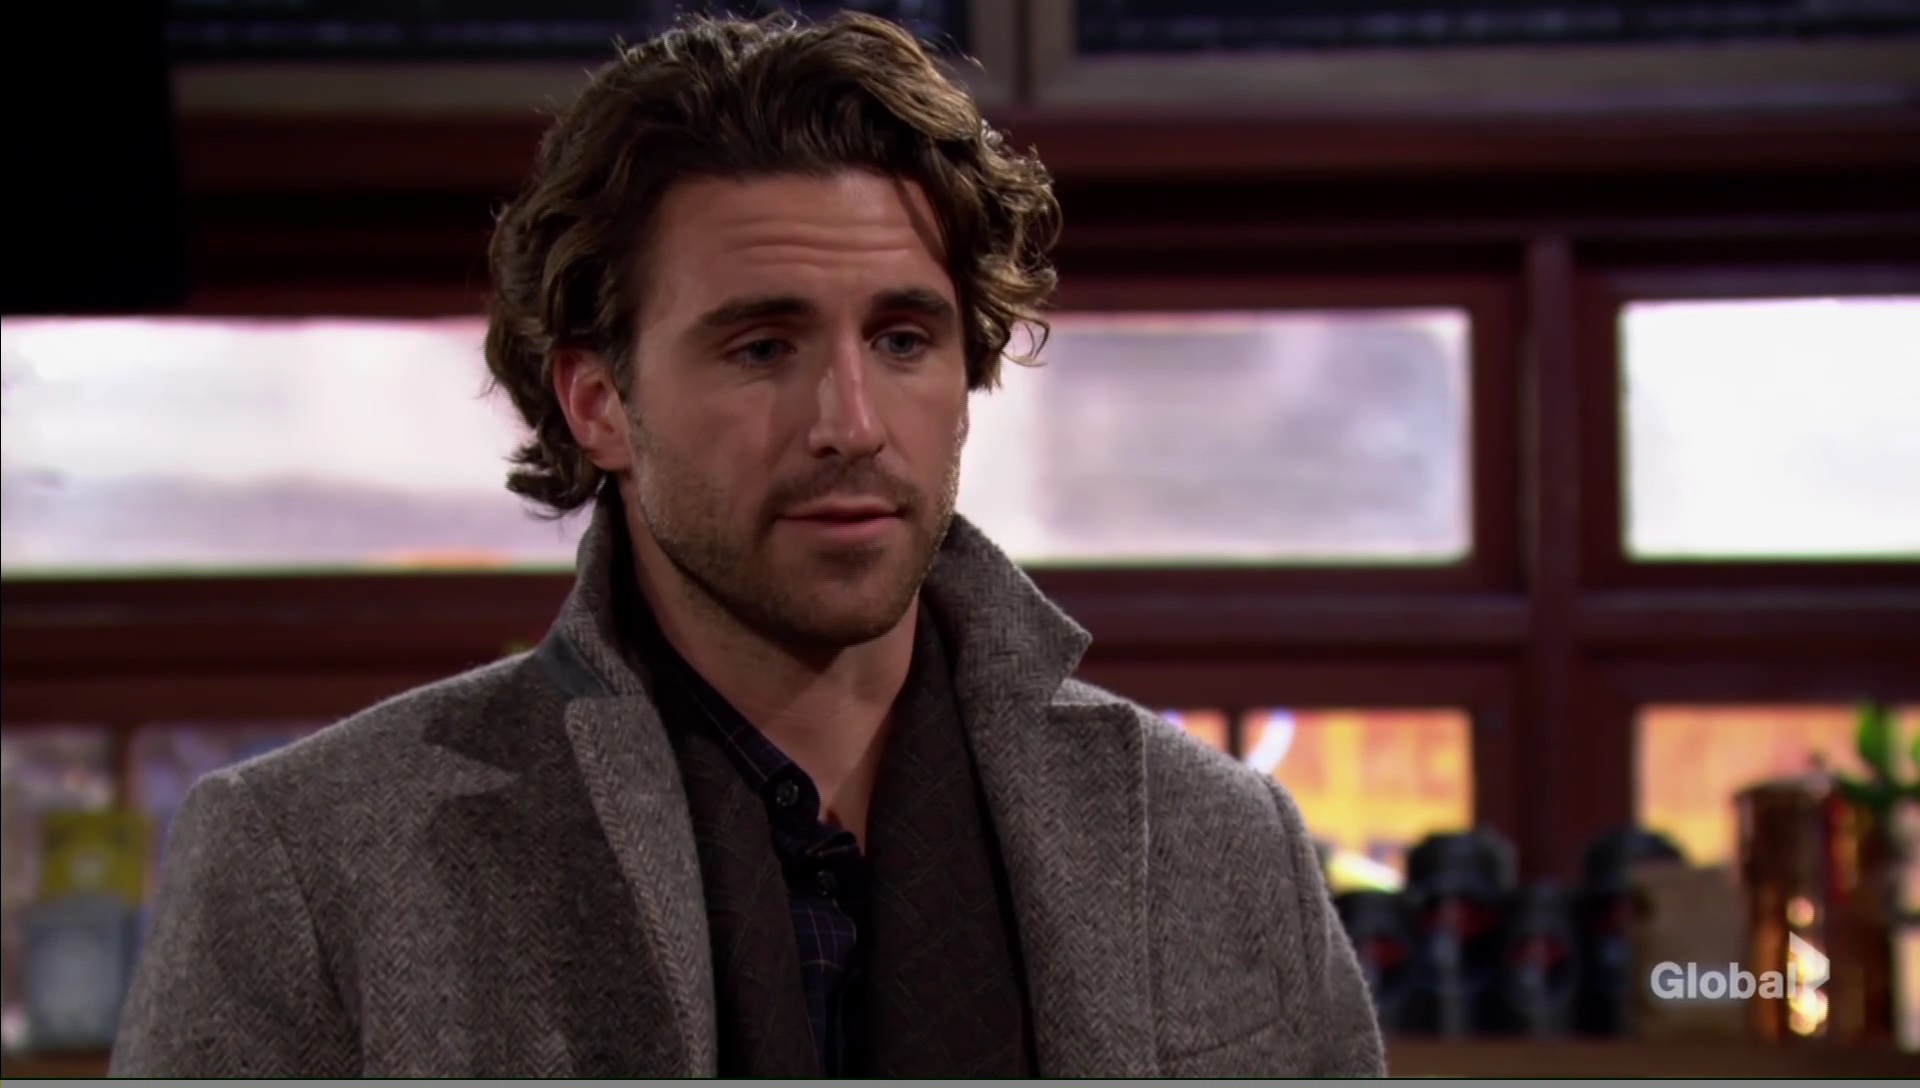 chance tells rey not working young restless cbs